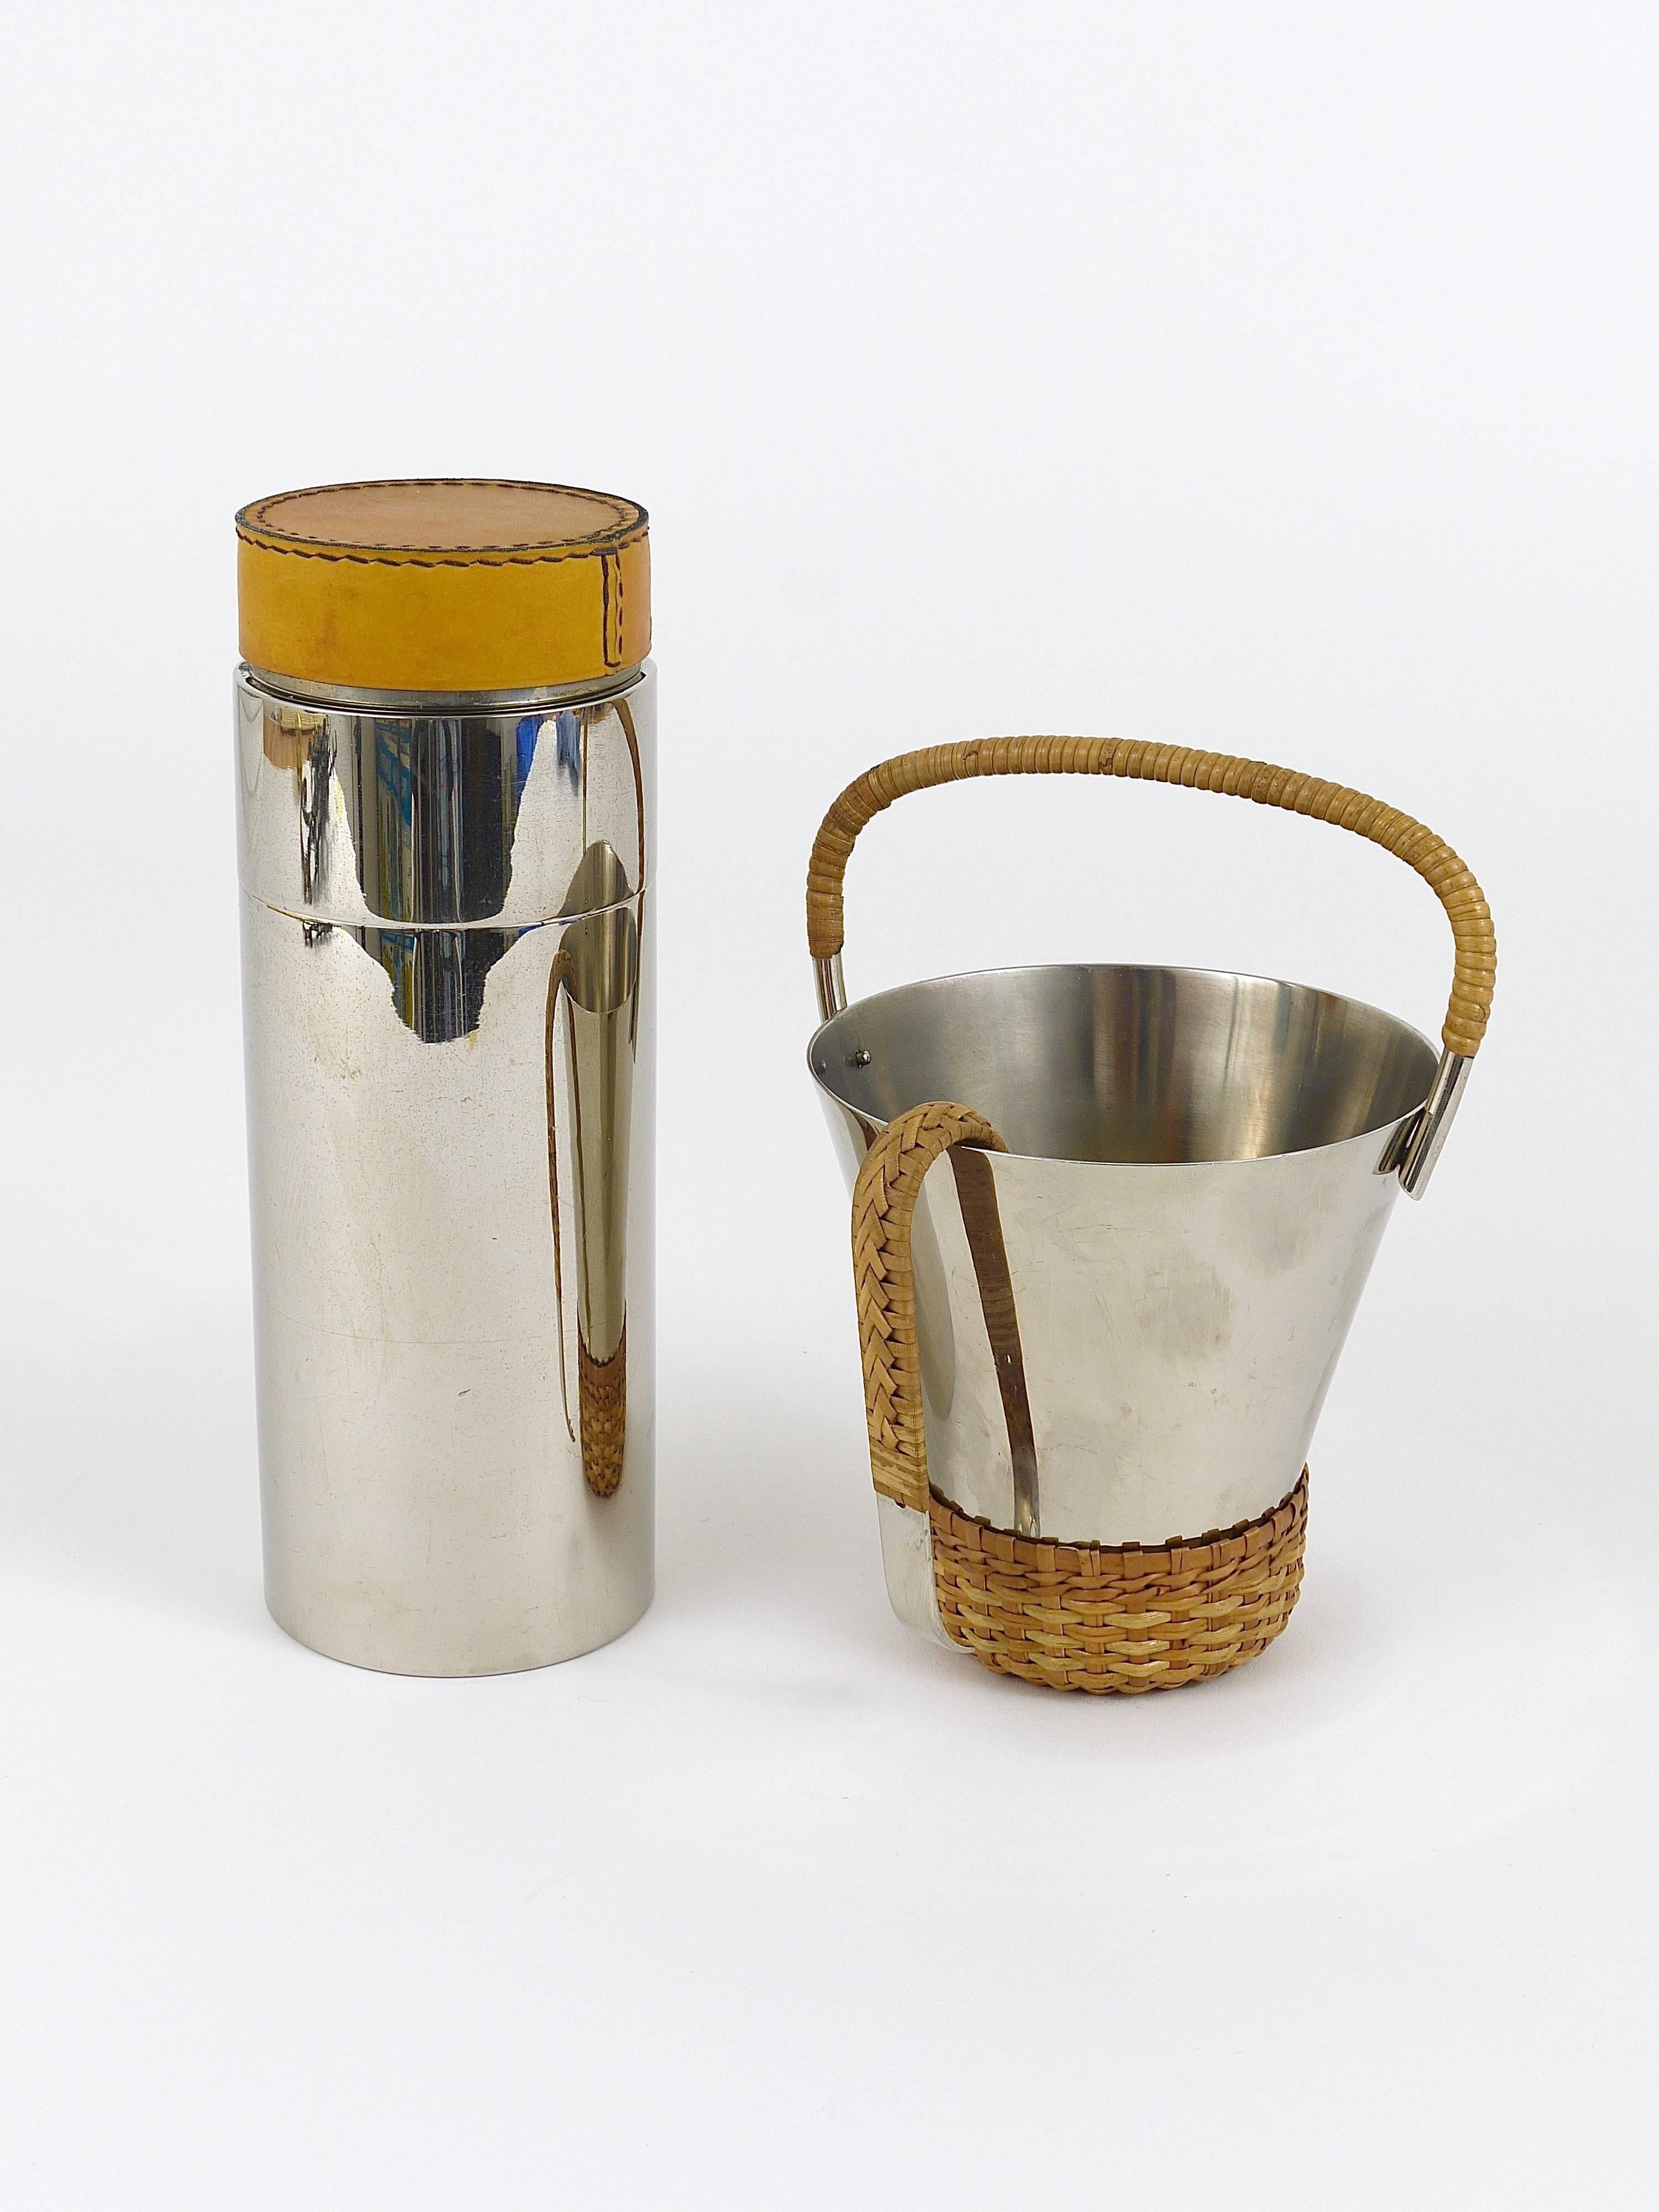 Carl Auböck Nickel-Plated Cocktail Shaker, Brass, Leather, Austria, 1950s 8